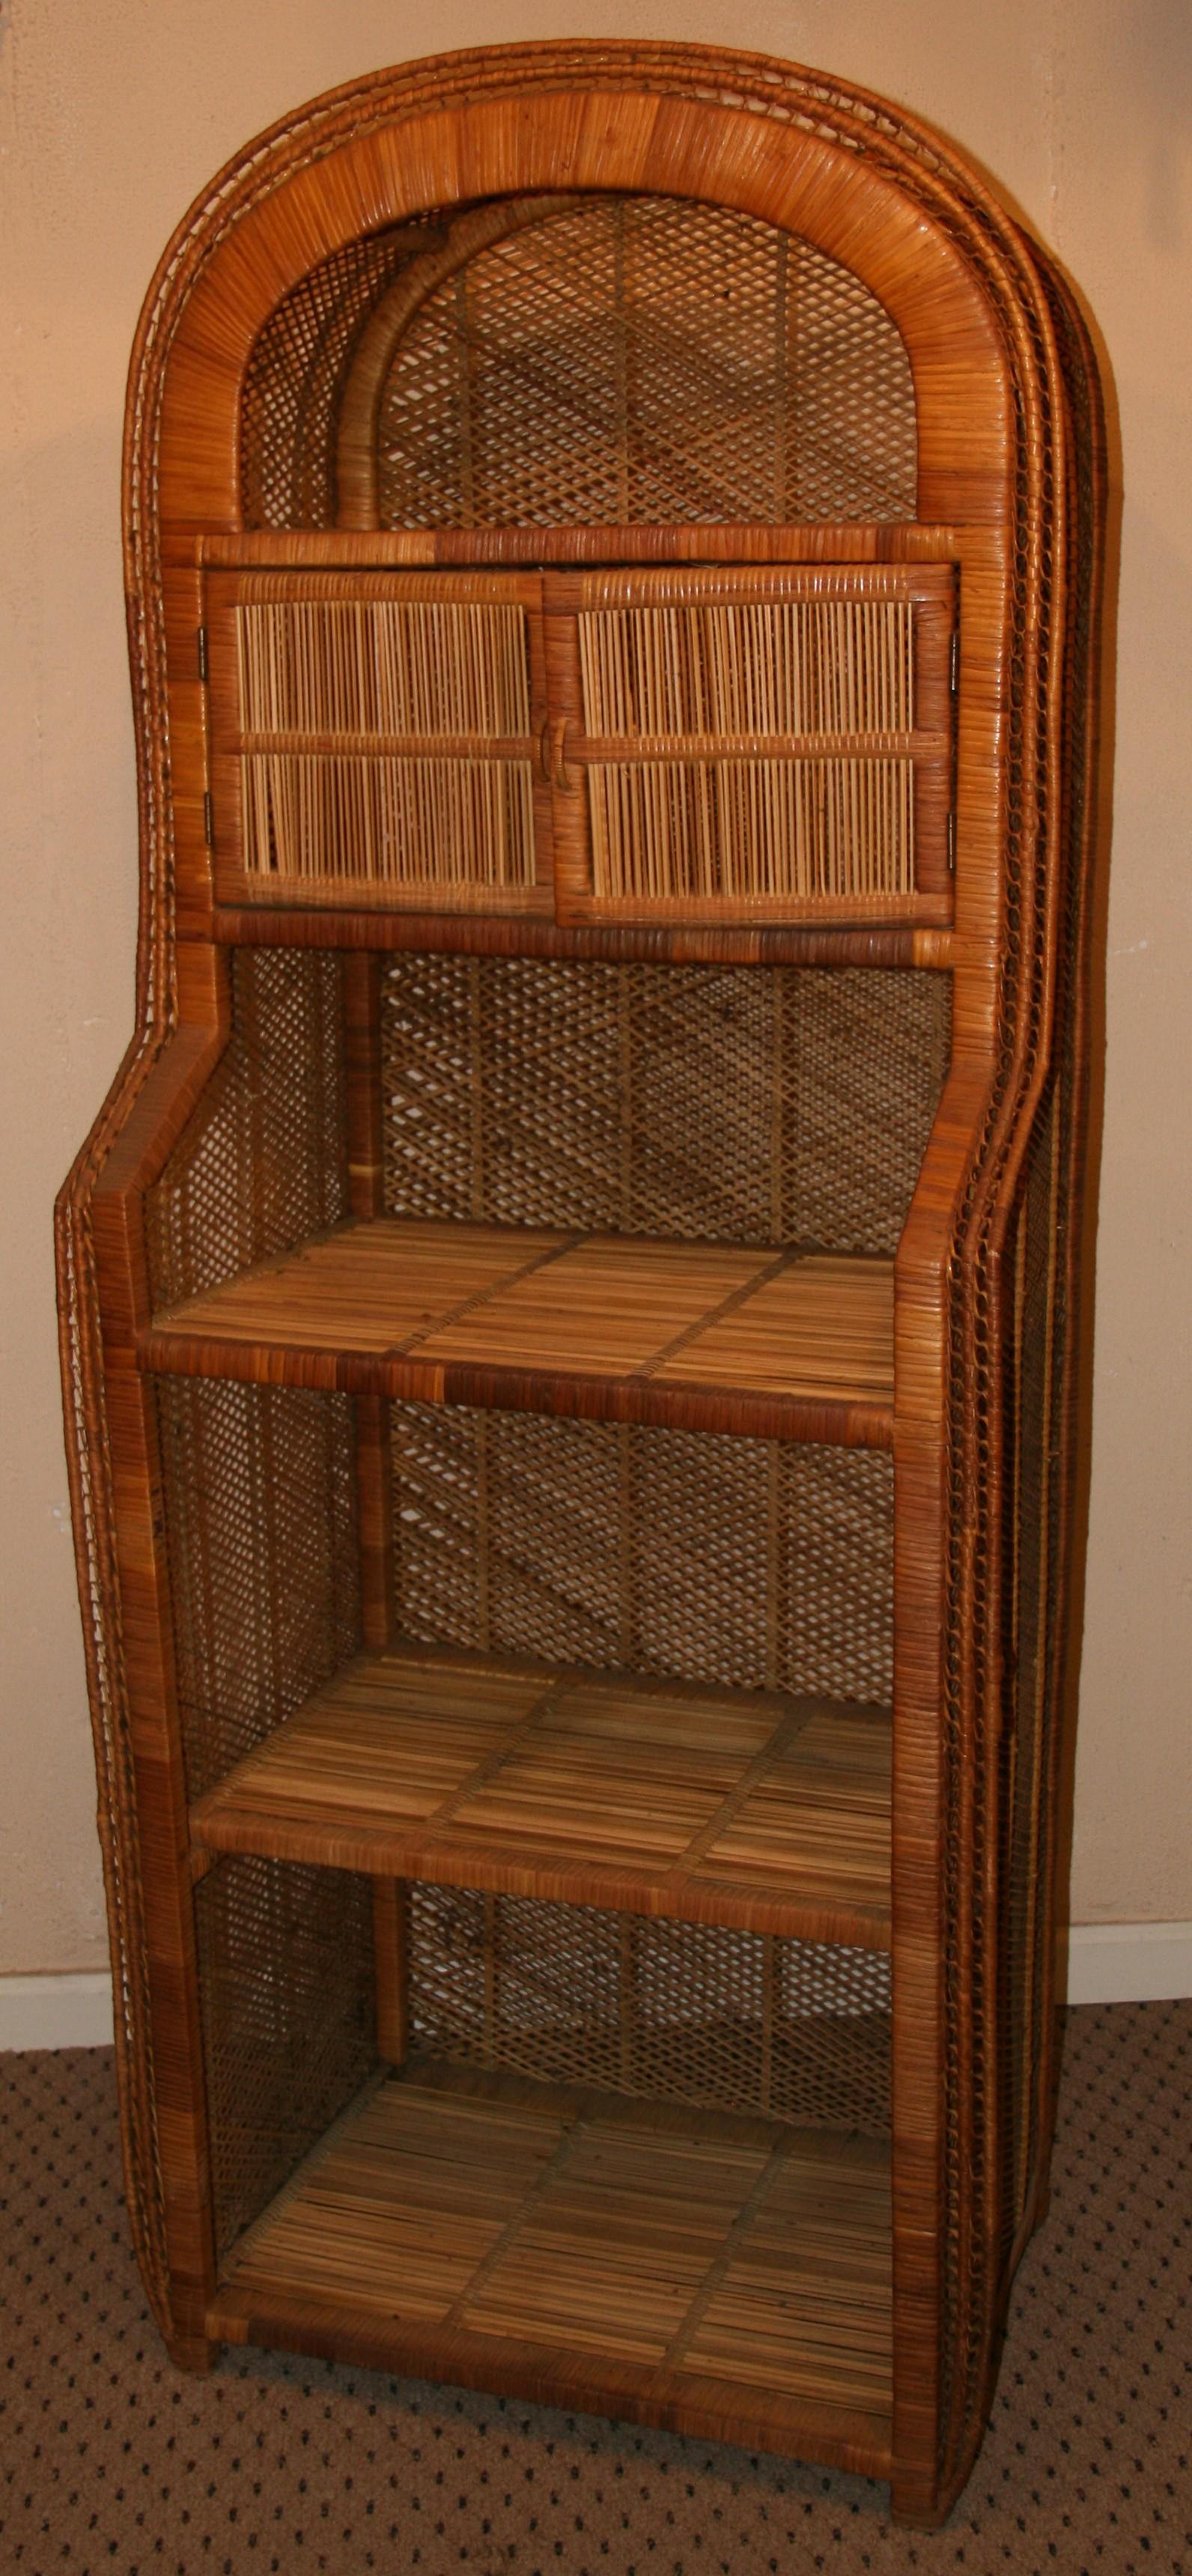 3-988 Hand crafted reed and wicker etagere with 5 shelves and folding upper doors
Top 12